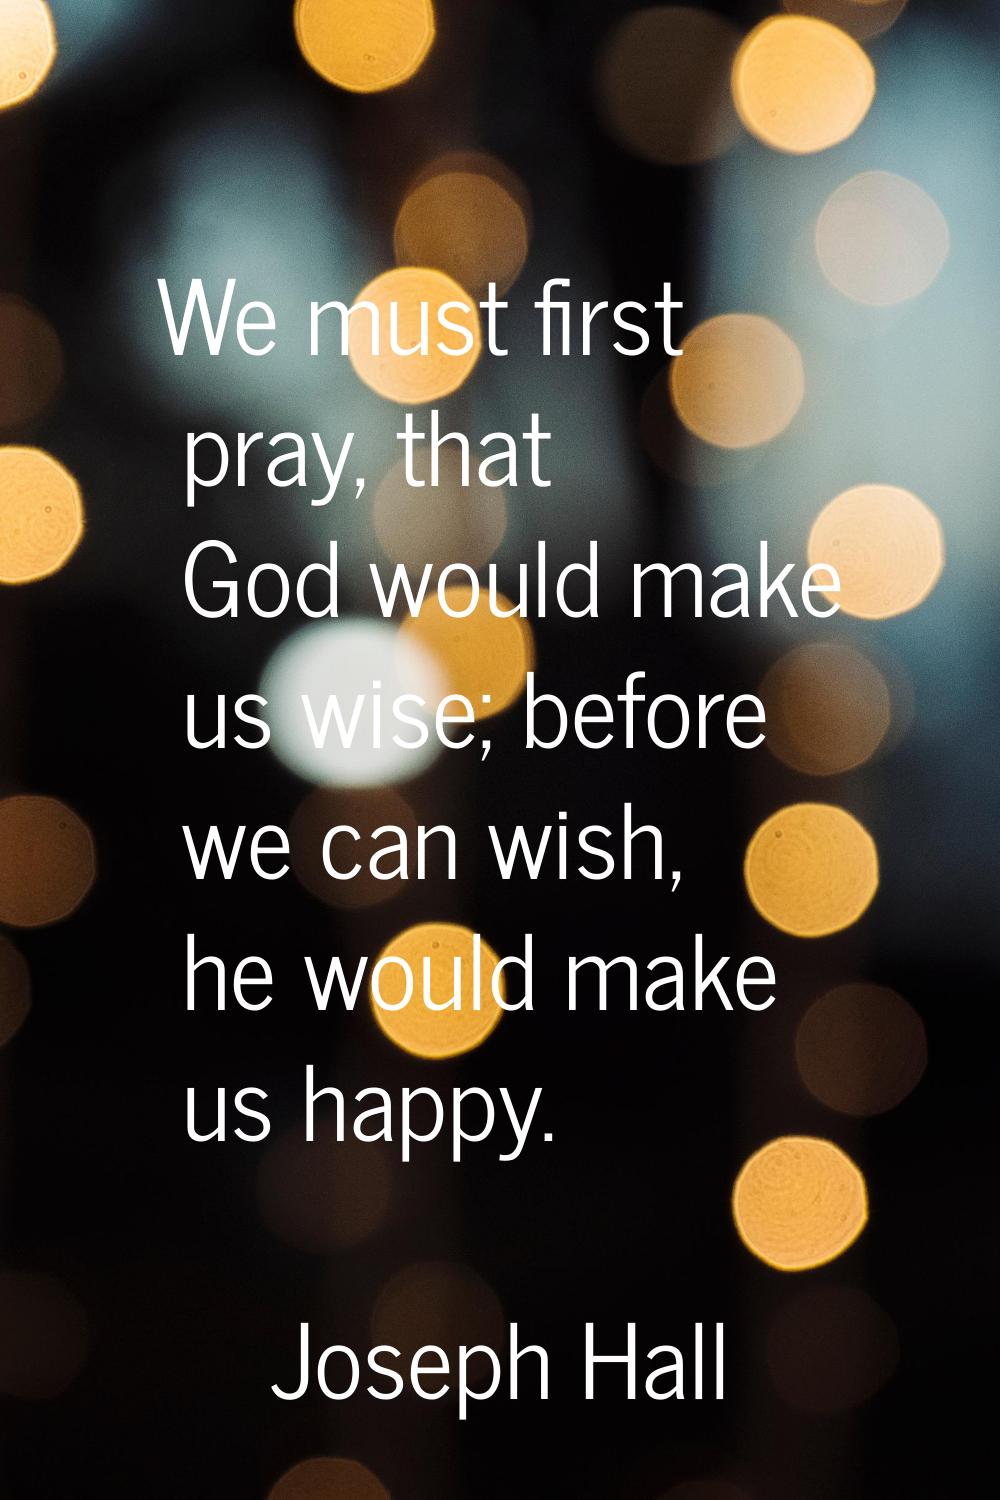 We must first pray, that God would make us wise; before we can wish, he would make us happy.